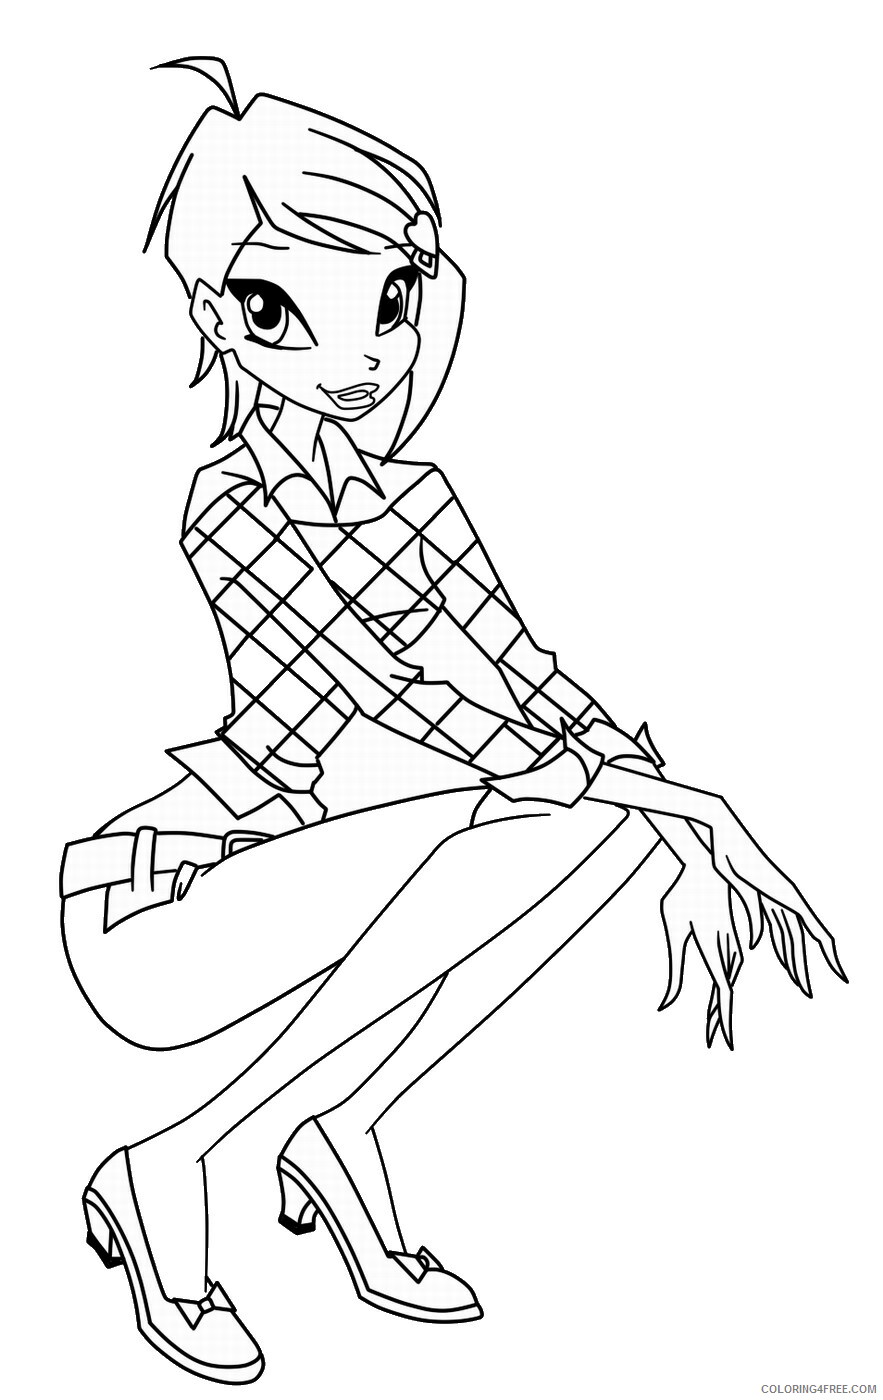 Winx Coloring Pages TV Film winx_cl_01 Printable 2020 11364 Coloring4free